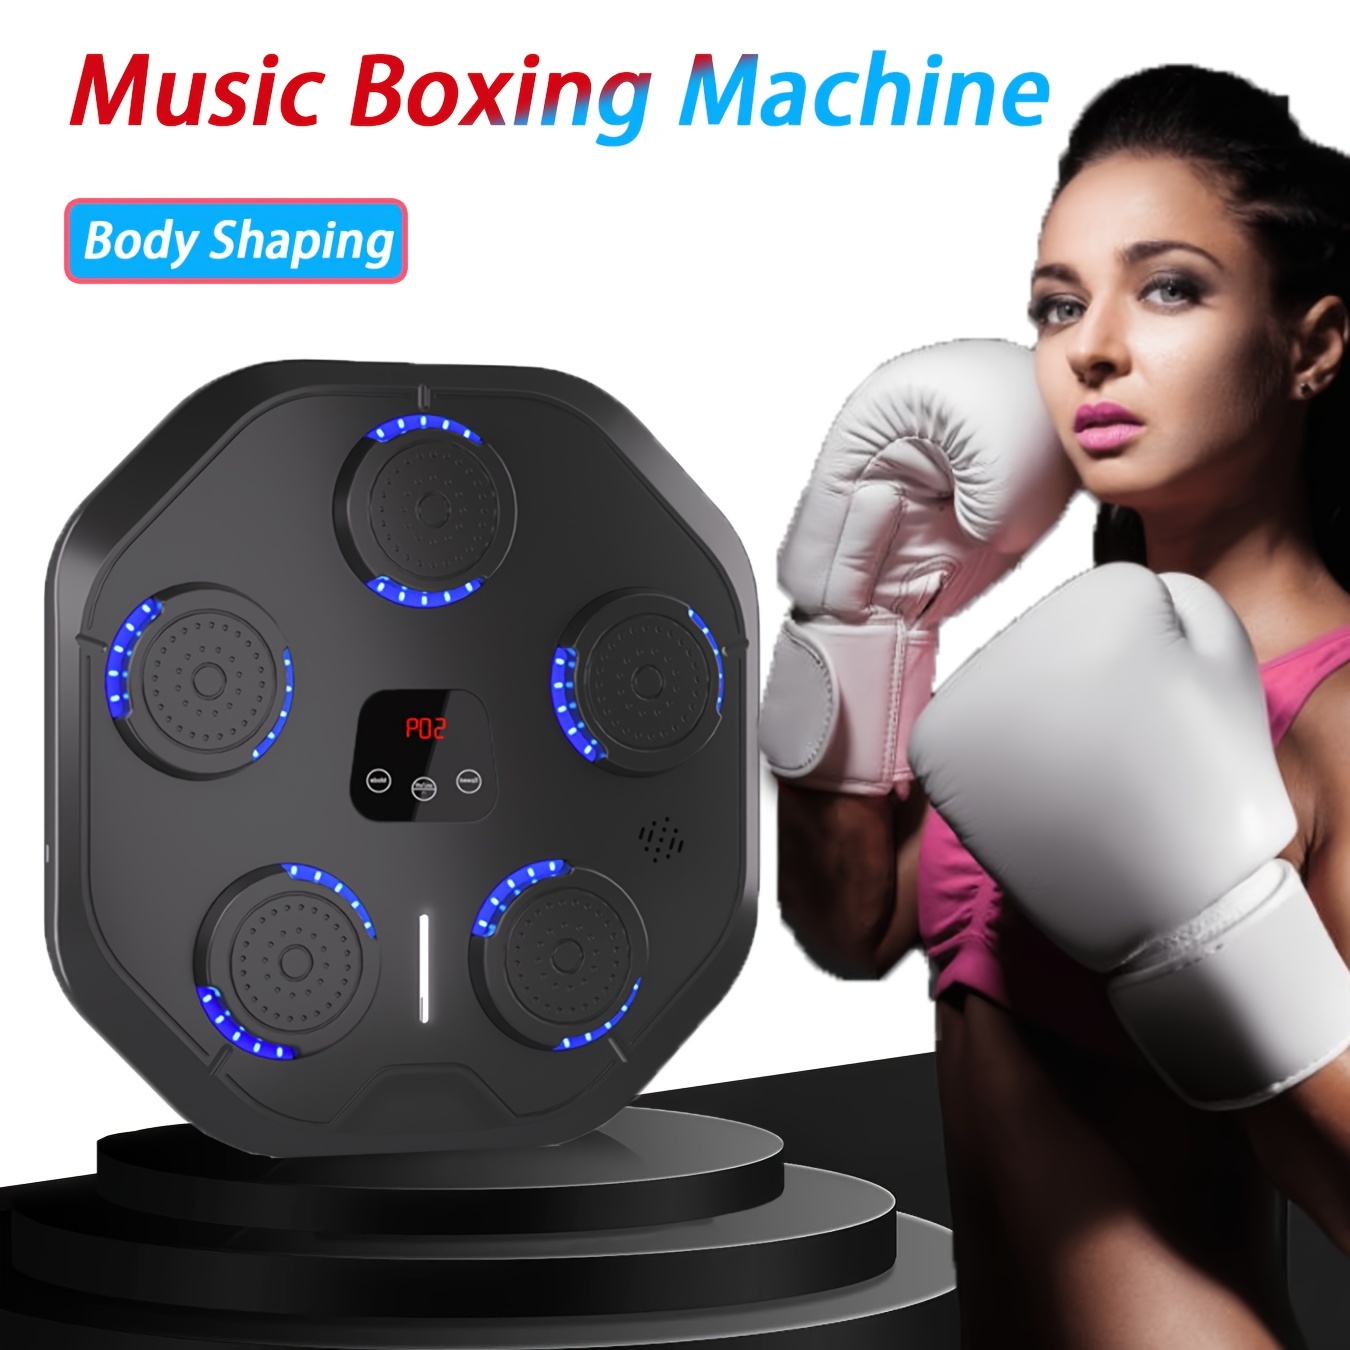 Music Boxing Machine Boxing Training Punching Equipment Boxing Target  Workout Machine for Home Exercise